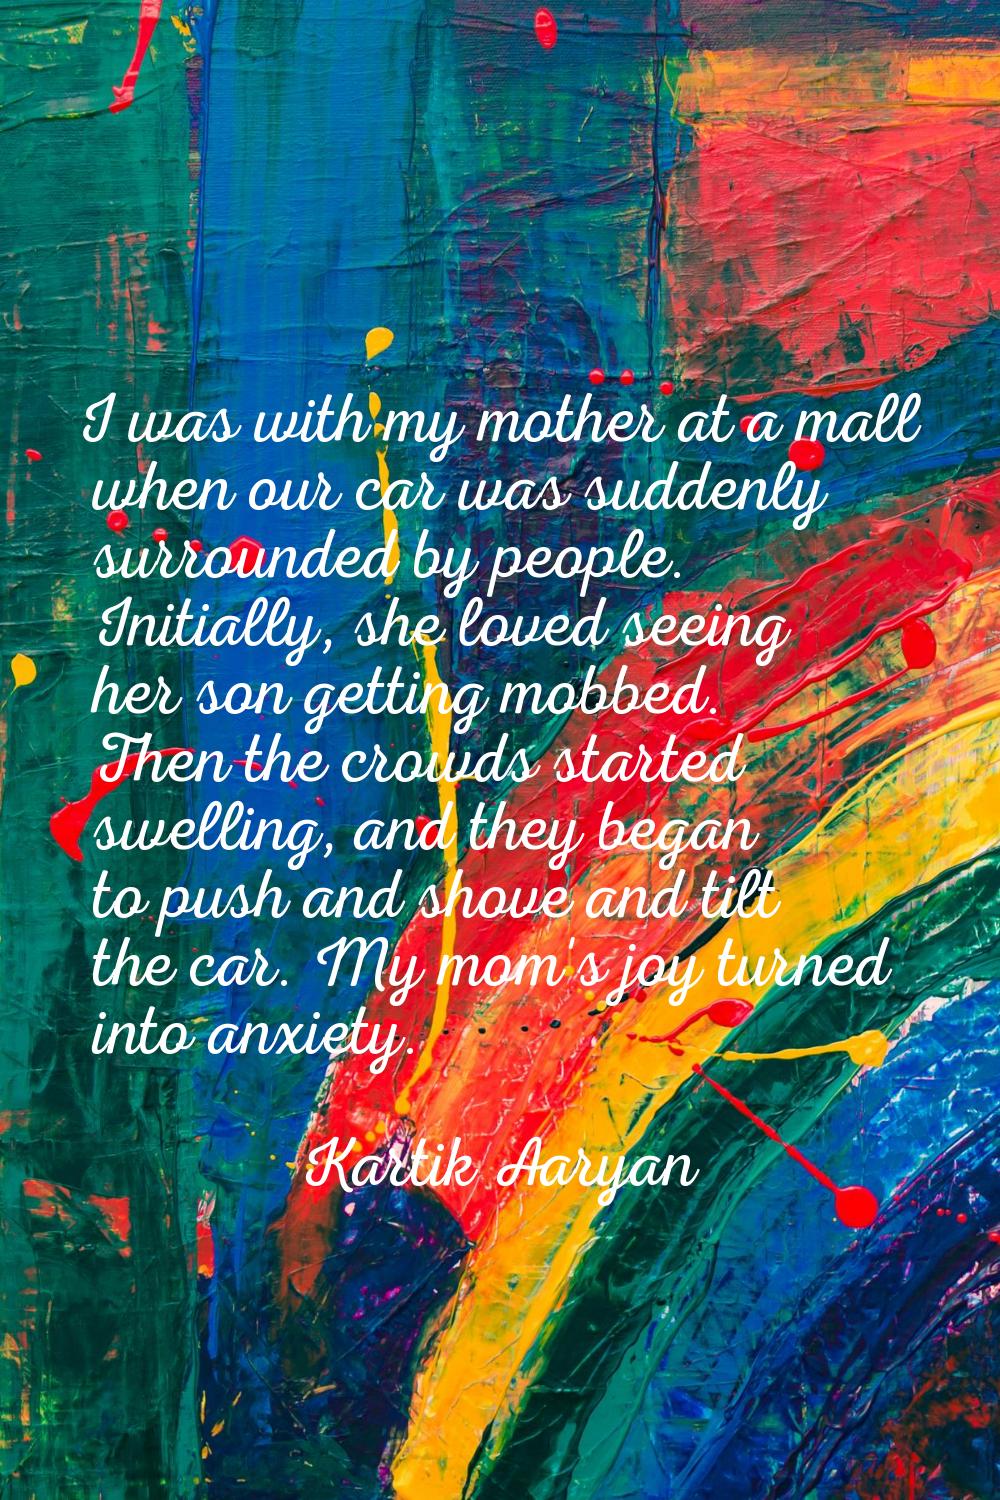 I was with my mother at a mall when our car was suddenly surrounded by people. Initially, she loved